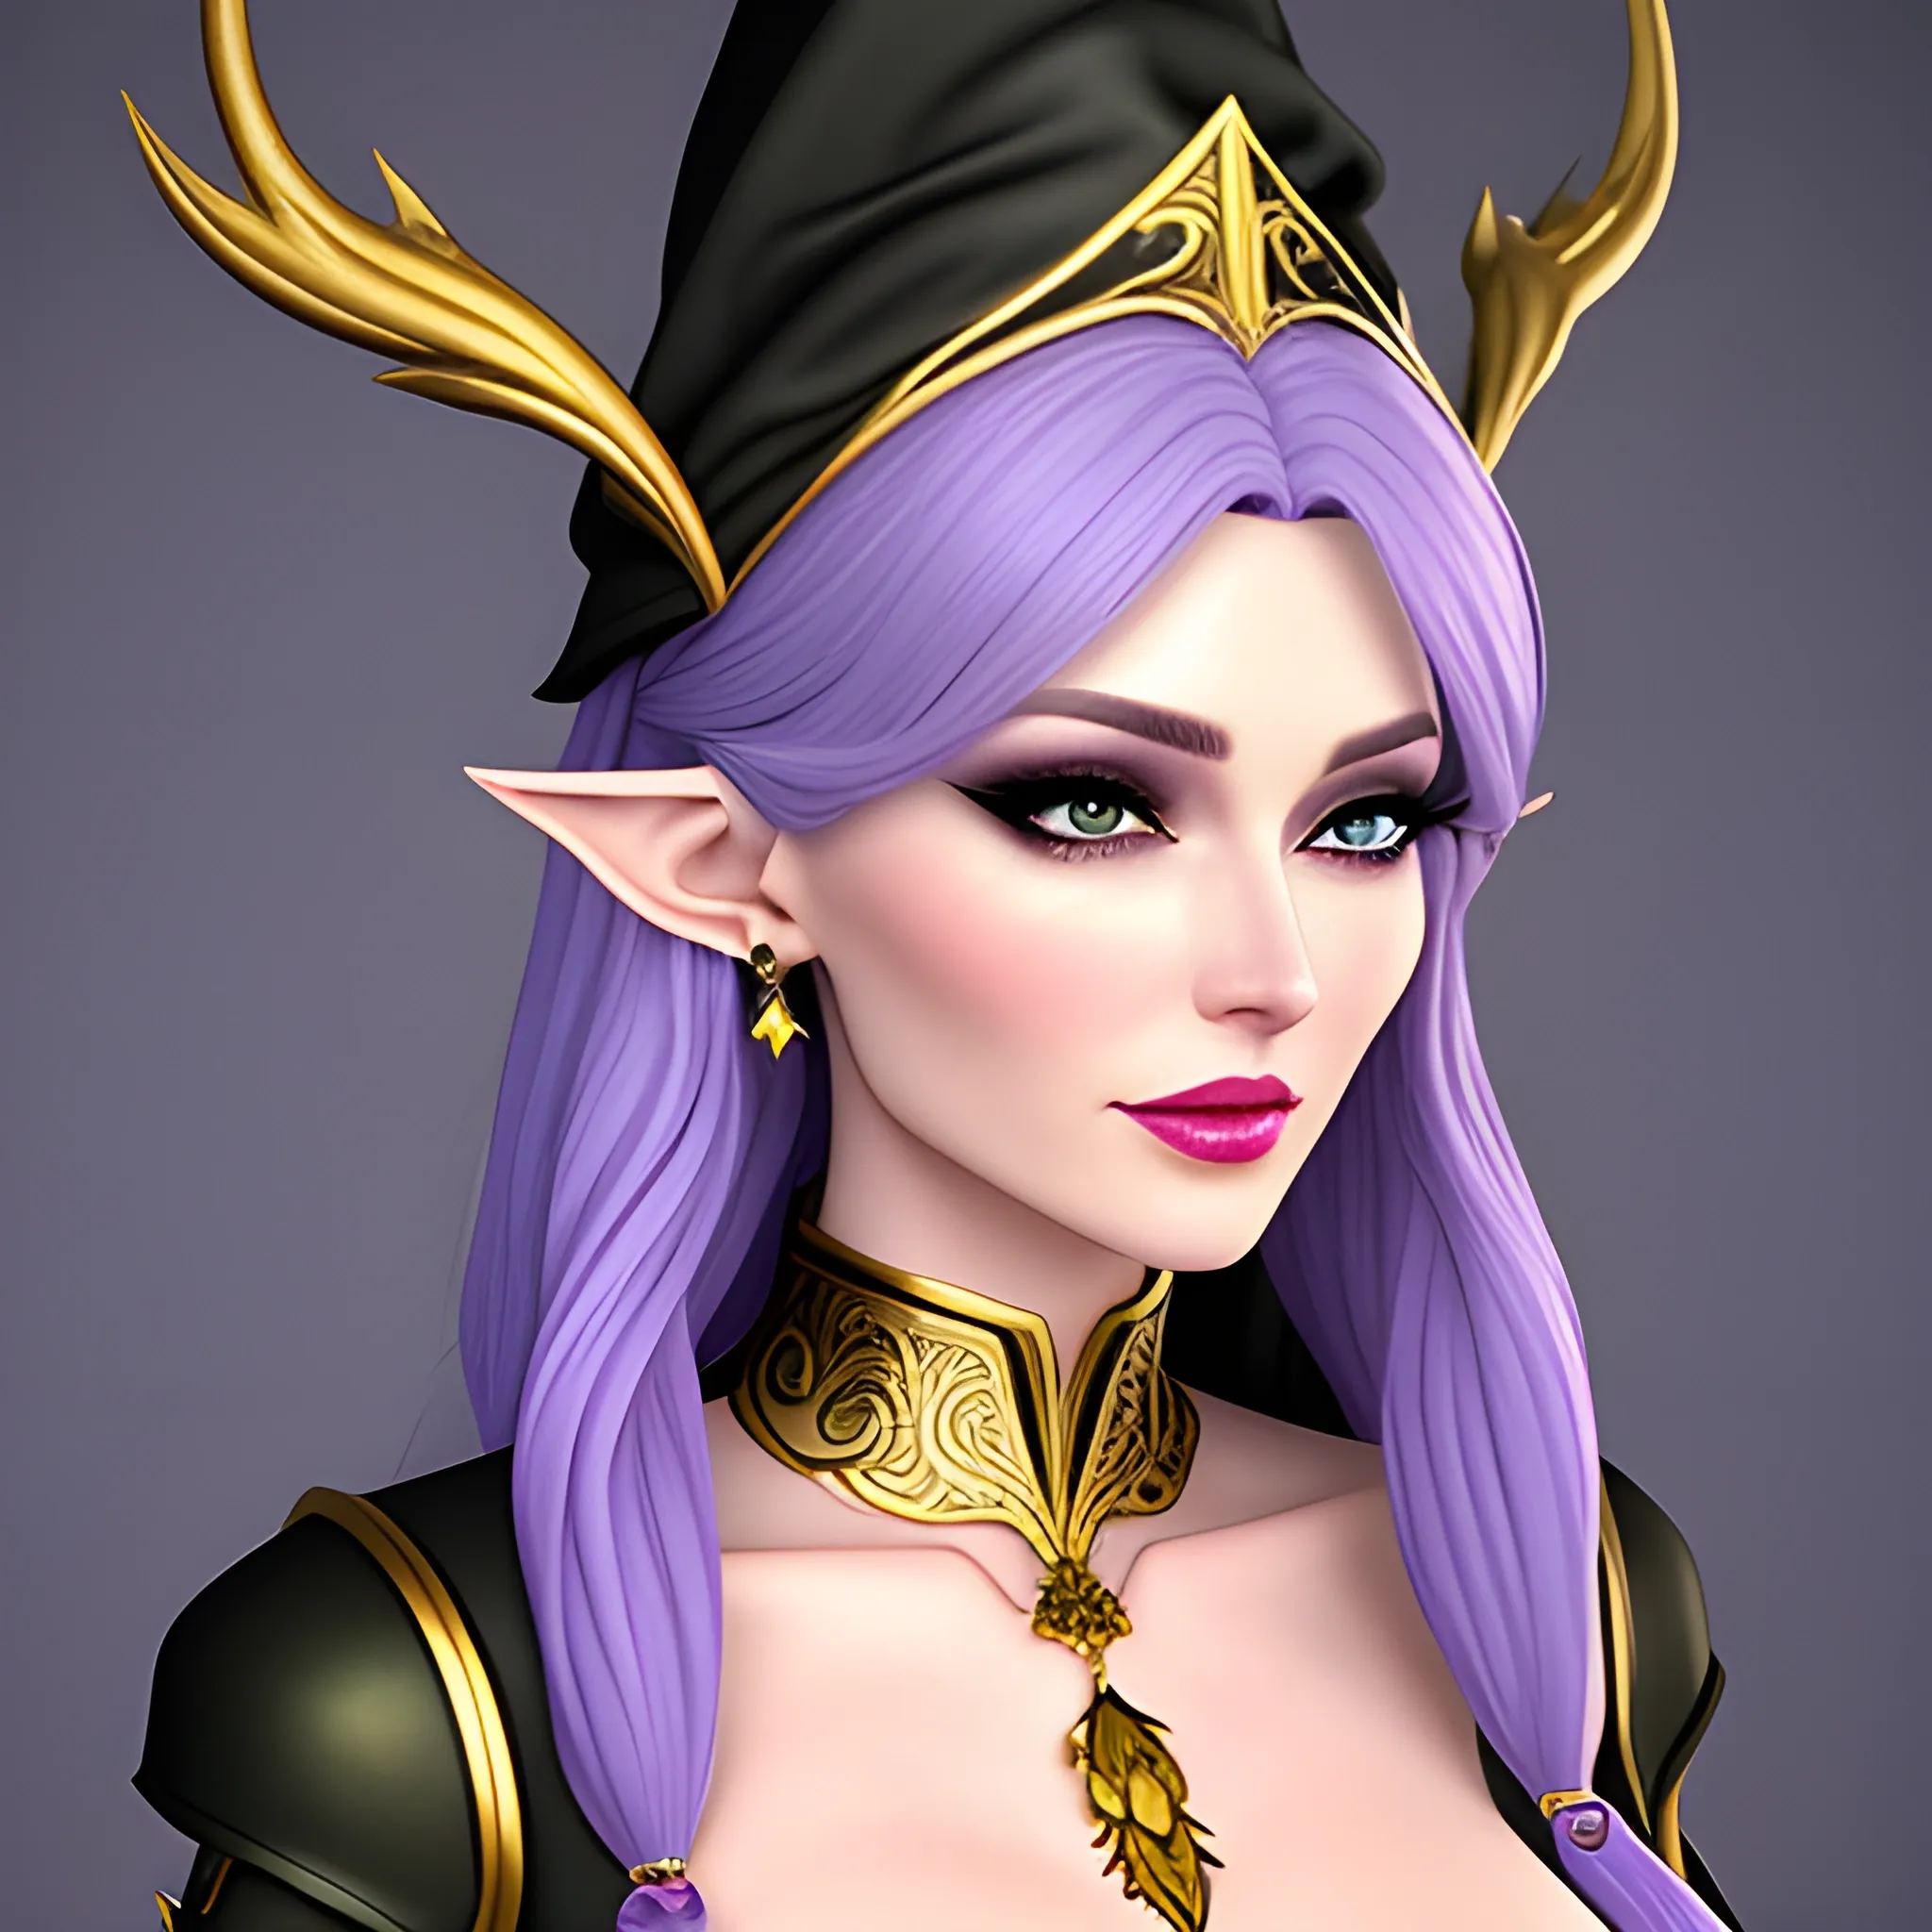 Create an image of a 16-year-old cute young woman with features and characteristics inspired by elves. She should have large, beautiful violet eyes, smooth and flawless porcelain skin. Her hair should be long, fine, and in a shade that harmonizes with the overall design. The main attire will be an elegant and detailed witch hat, complemented by magical and golden feminine armor. The clothing and accessories, including earrings, bracelets, or necklace, should be made of shining gold.

Additional details:

Ensure that the woman's face reflects grace and wisdom, typical of elves.
The witch hat should have a mysterious touch and be decorated with magical symbols or runes.
The violet eyes should be intense and expressive, capturing the viewer's attention.
The porcelain skin should have a soft and luminous appearance.
The gold accessories should be delicate and intricately designed, highlighting the character's elegance.
(Note: Feel free to be creative and add any other details you consider appropriate to achieve a unique and captivating image of the young elf-like woman with a witch hat and golden accessories.) 3D